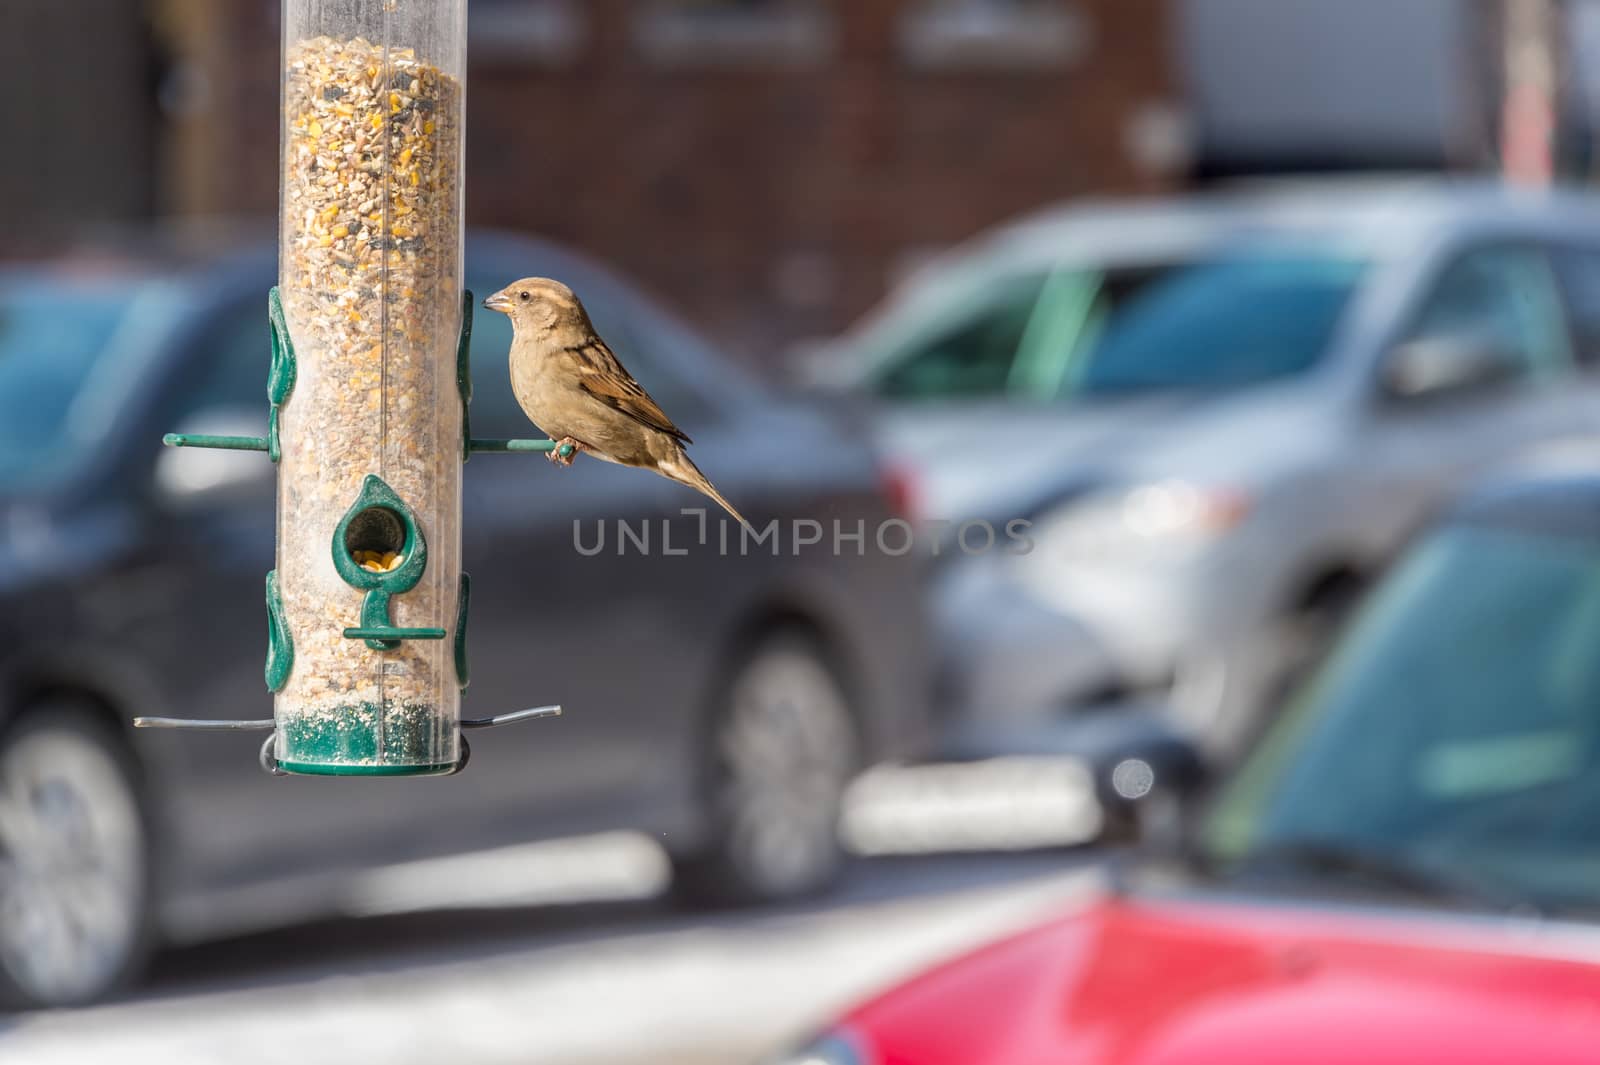 Sparrow eating seeds from bird feeder in a city with cars in background